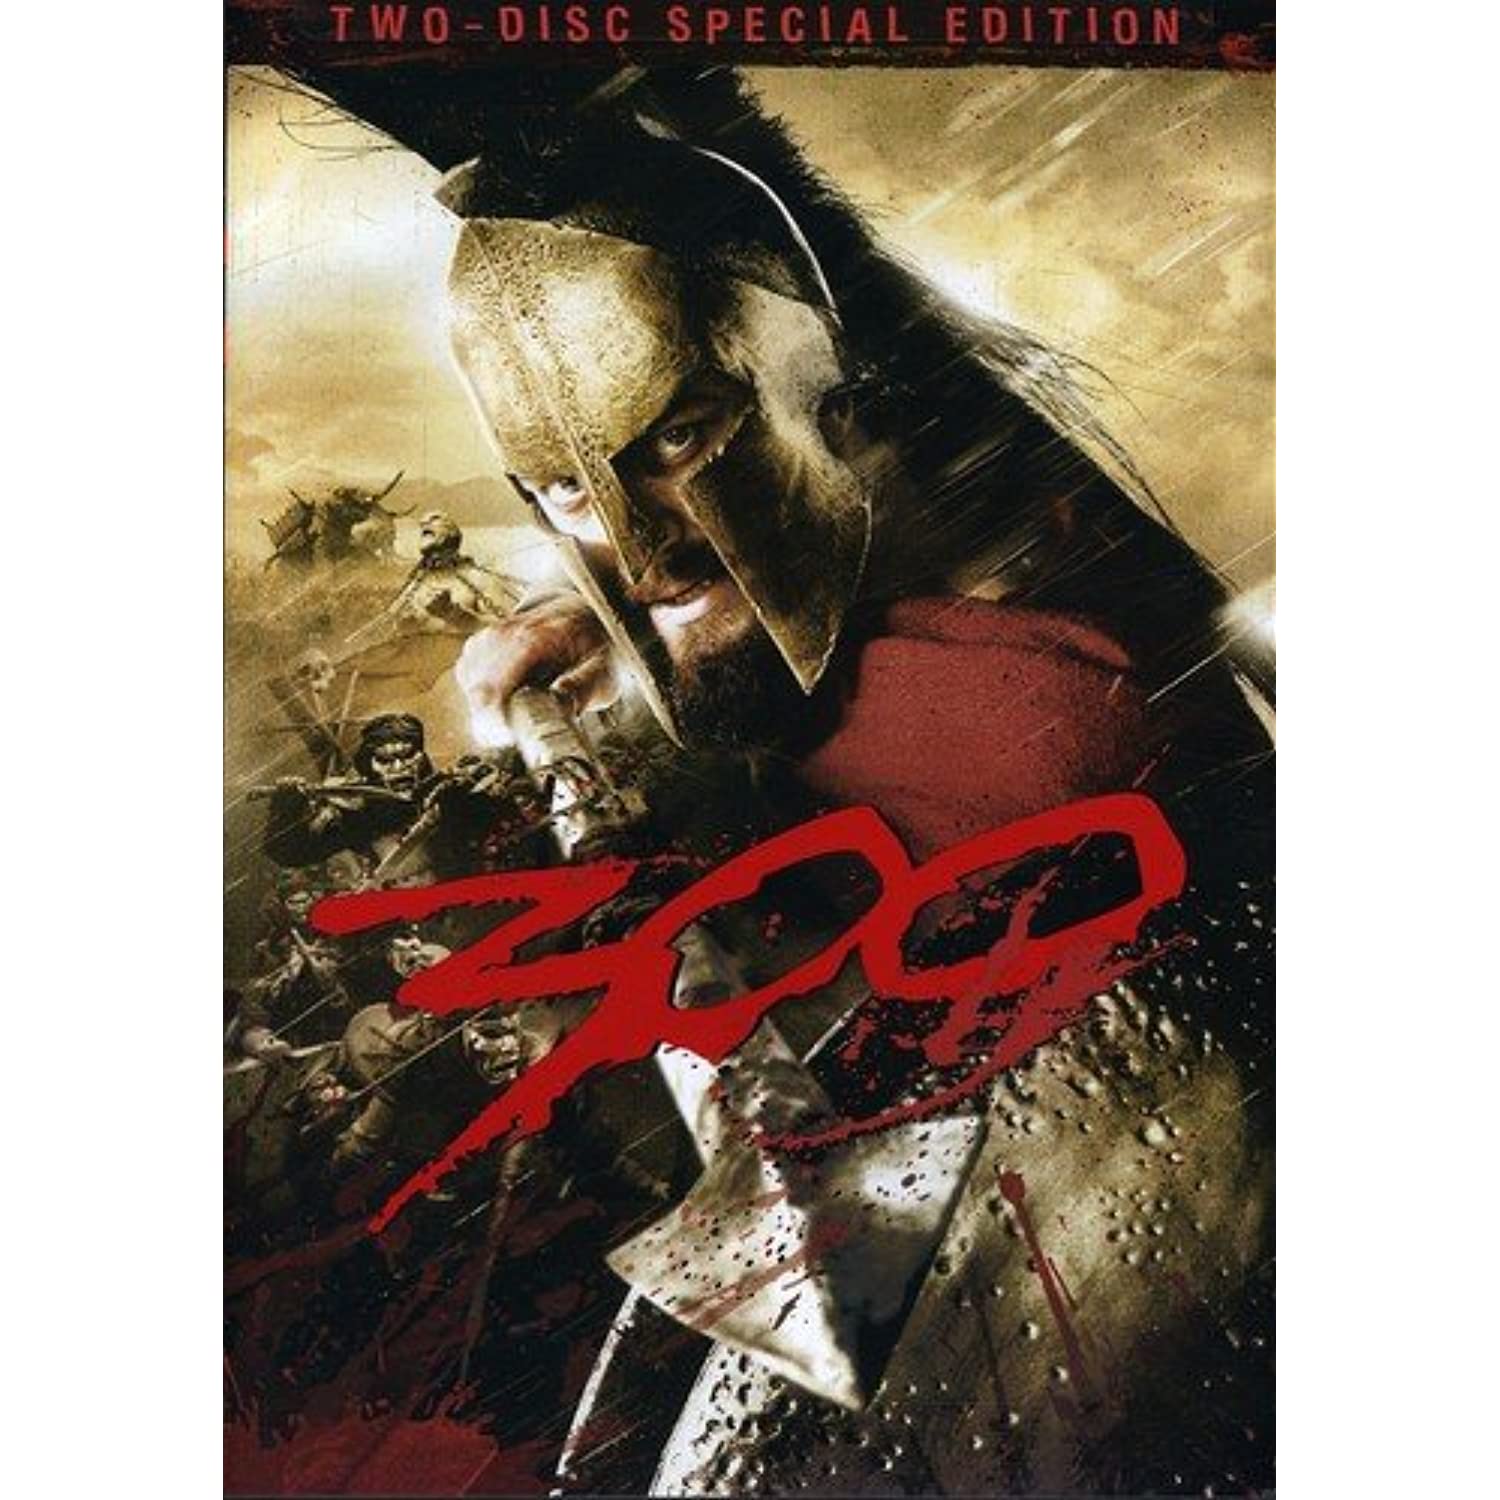 300 (Two-Disc Special Edition) DVD